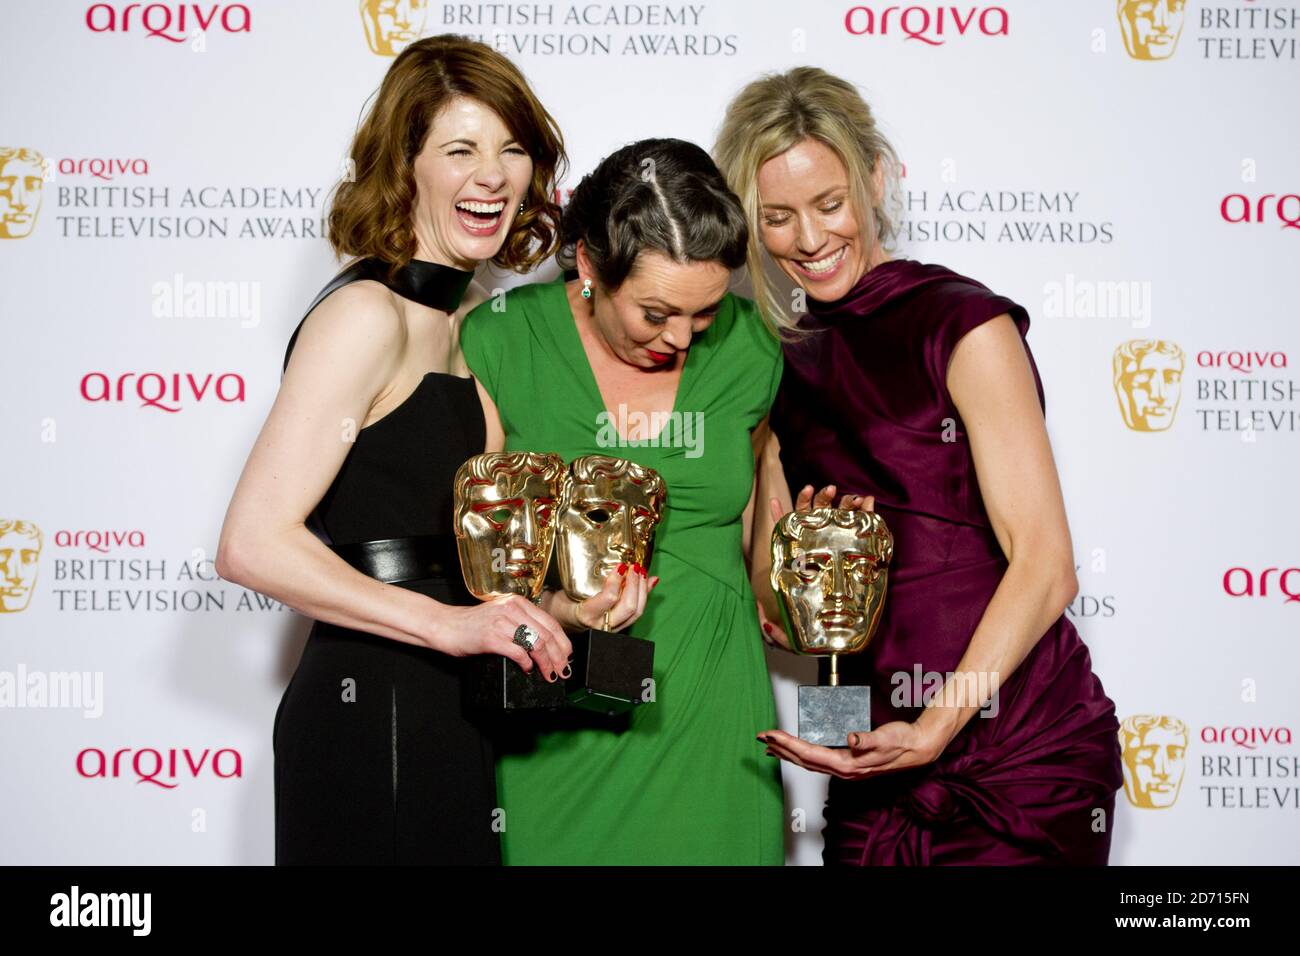 (left to right) Jodie Whittaker, Olivia Colman and Simone McAullay with the Drama Series Award for Broadchurch, at the 2014 Arqiva British Academy Television Awards at the Theatre Royal, Drury Lane, London. Stock Photo